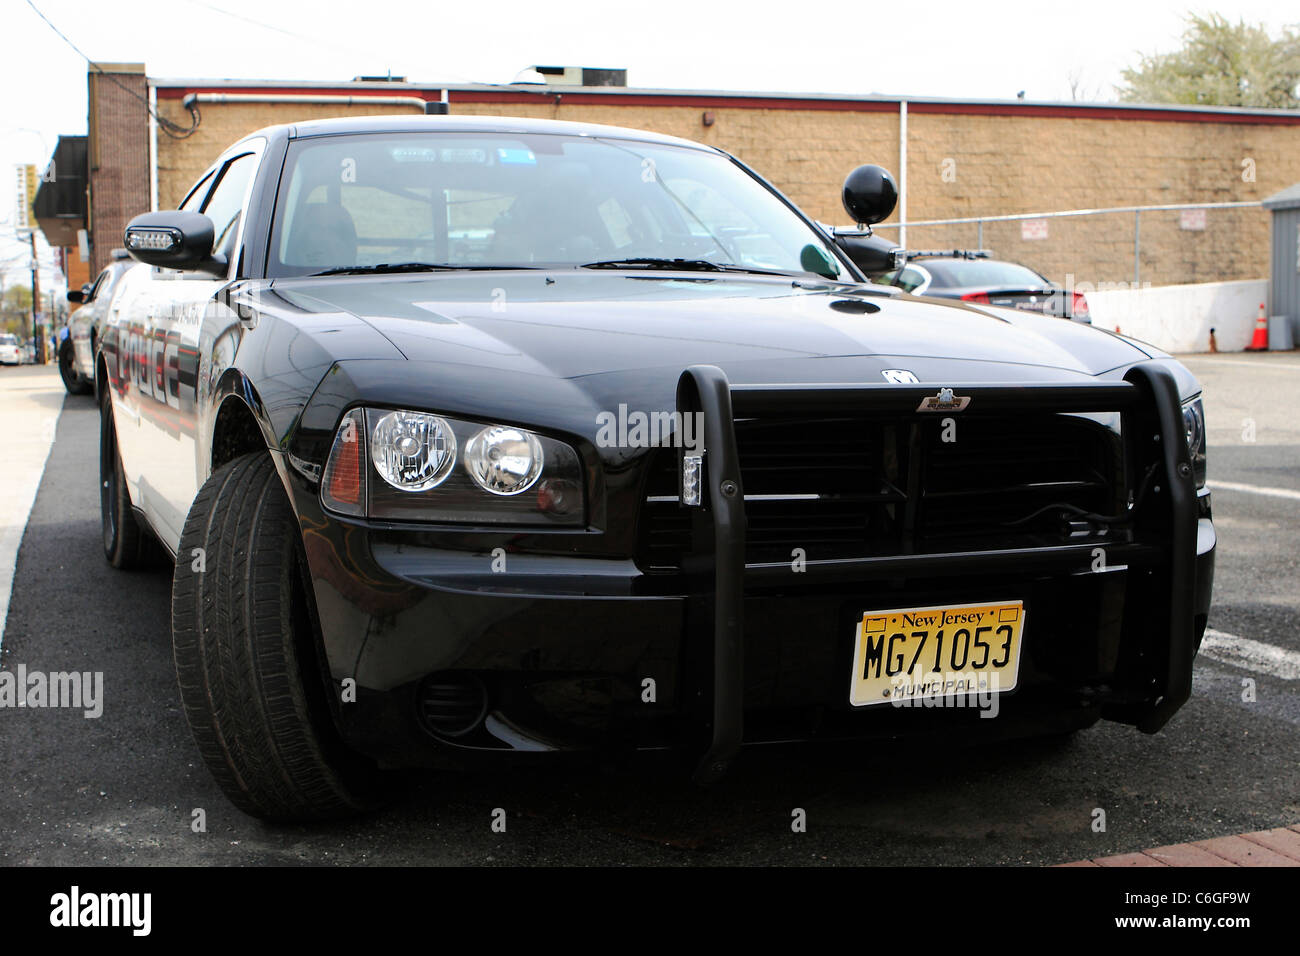 Dodge Charger Police cruiser. Stock Photo